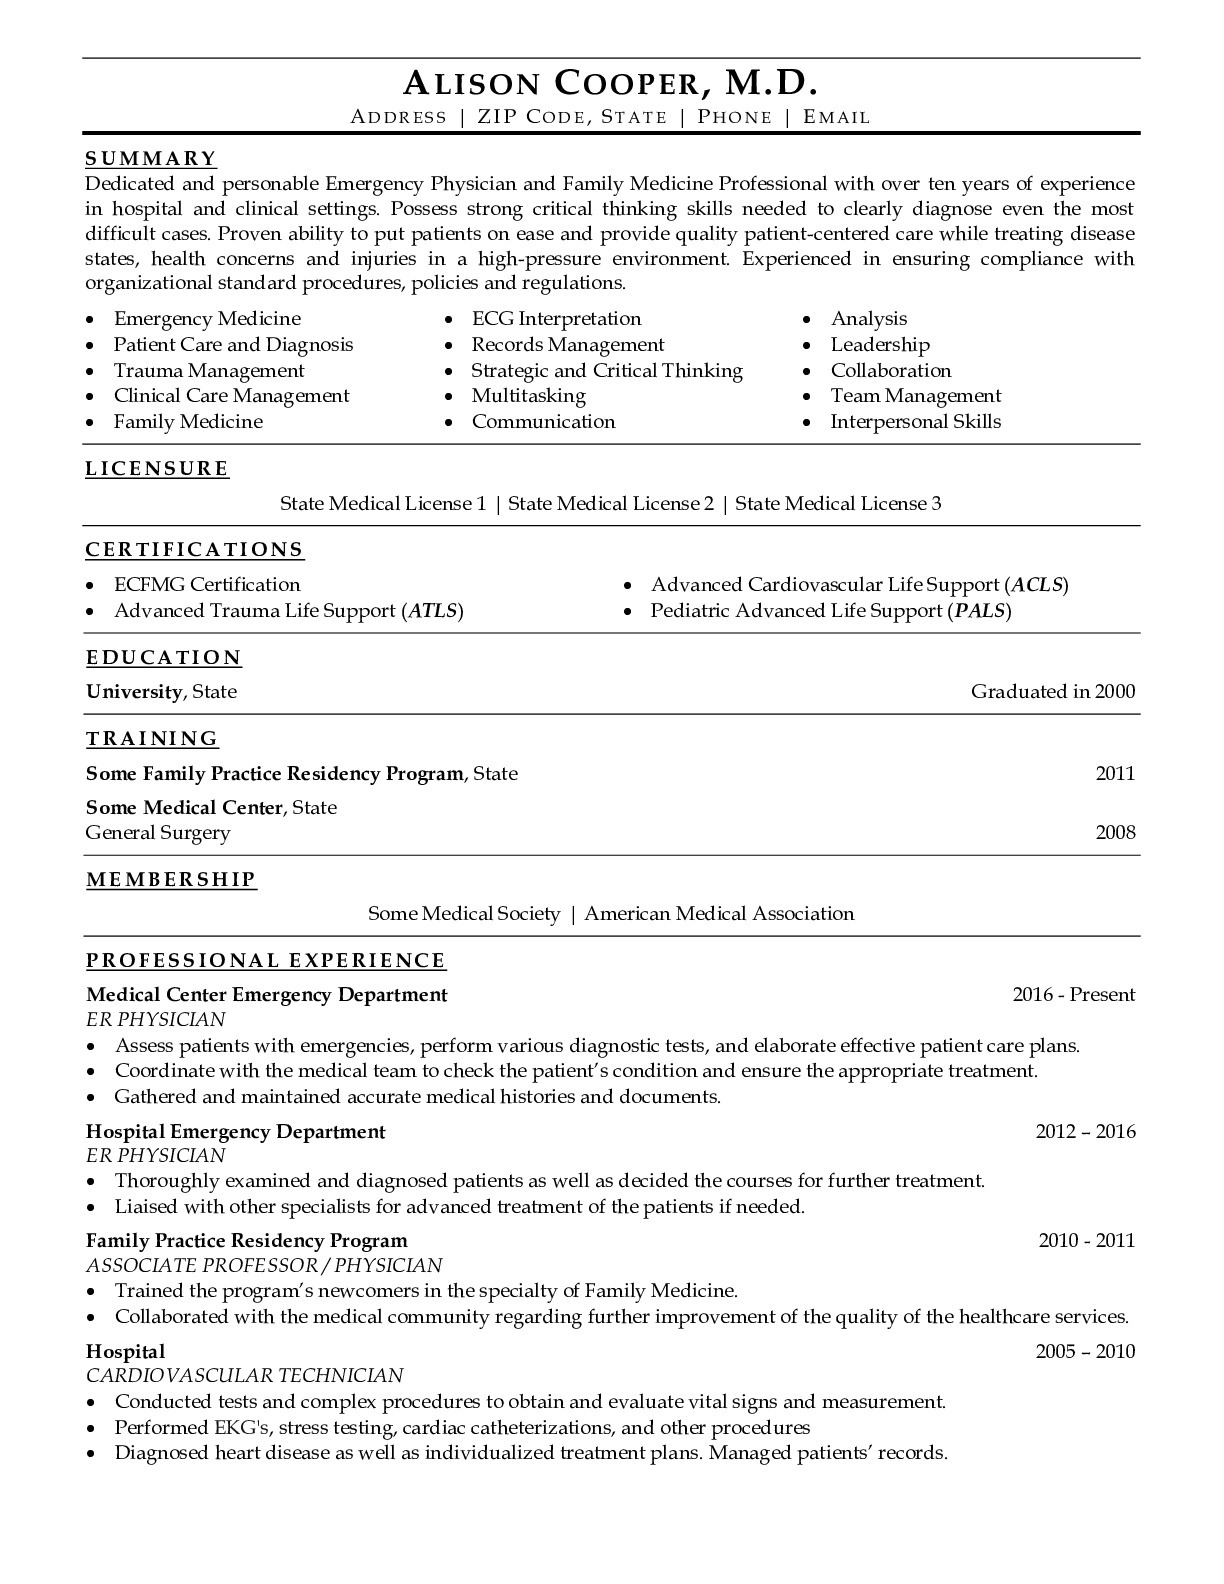 Medical Doctor Resume Example